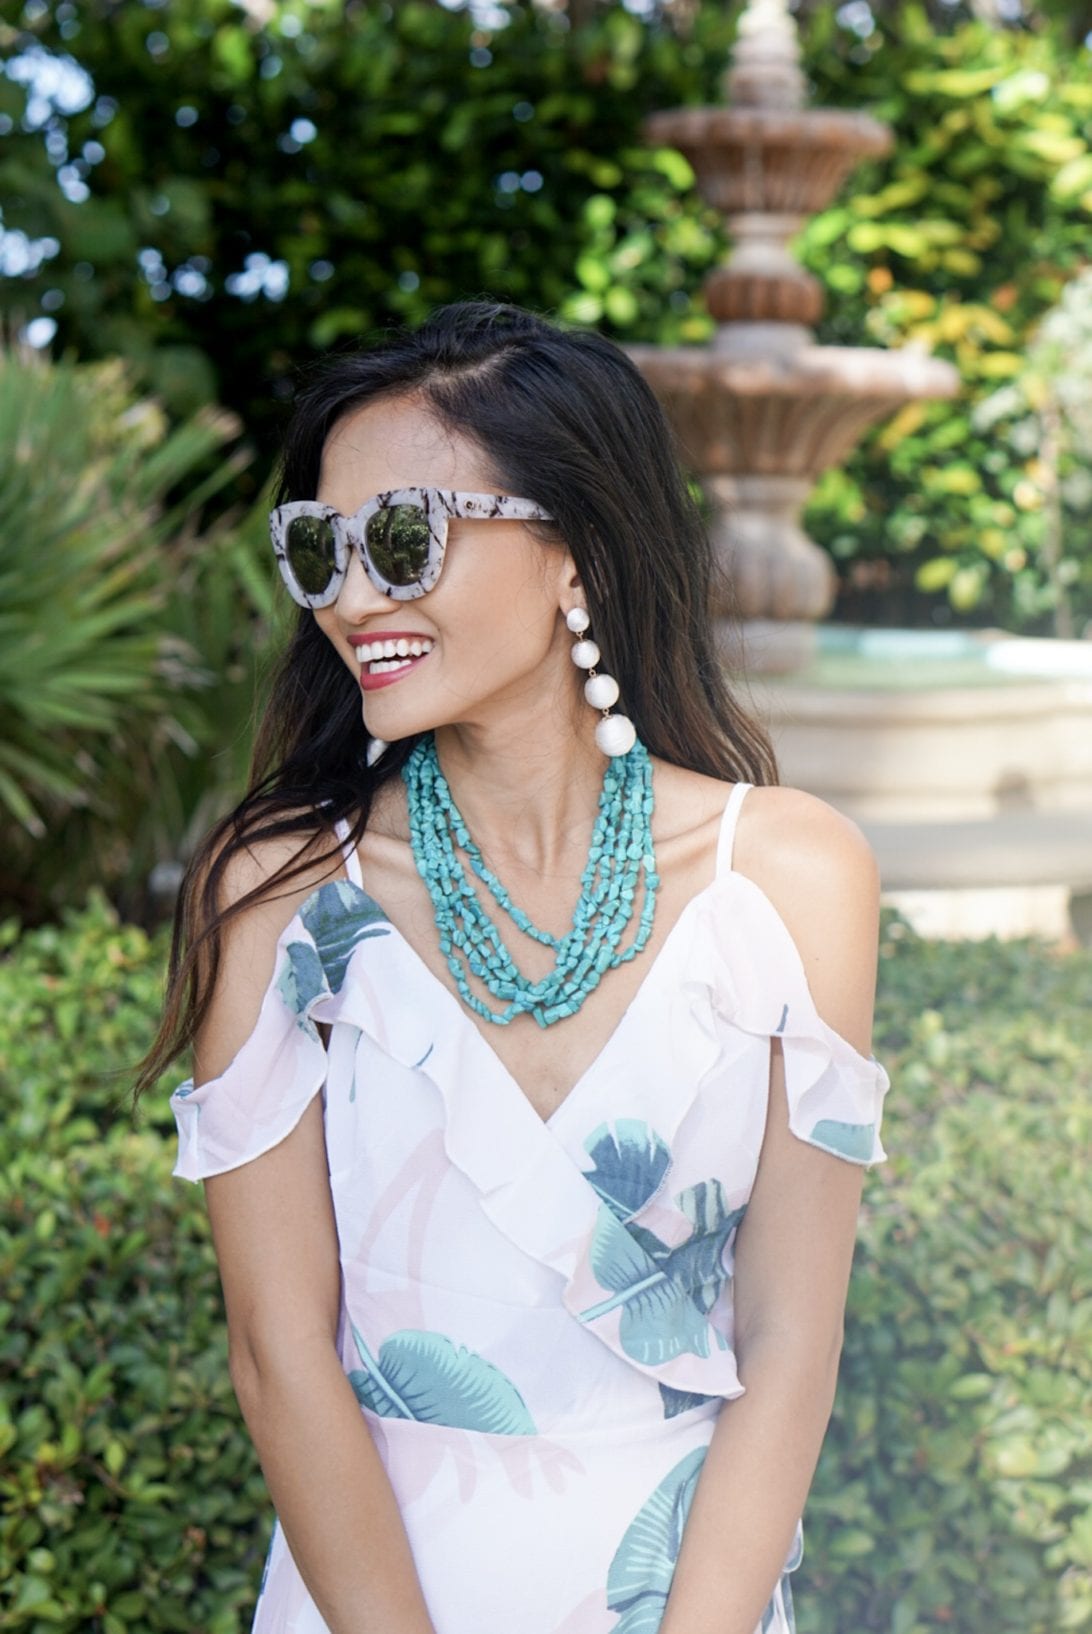 Palm Print Dress for Under $20, summer style, palm print dress, off the shoulder dress, monogrammed bag, turquoise necklace, quay sunglasses, vacation style, Mia sandals, Gigi Ghillie Sandal